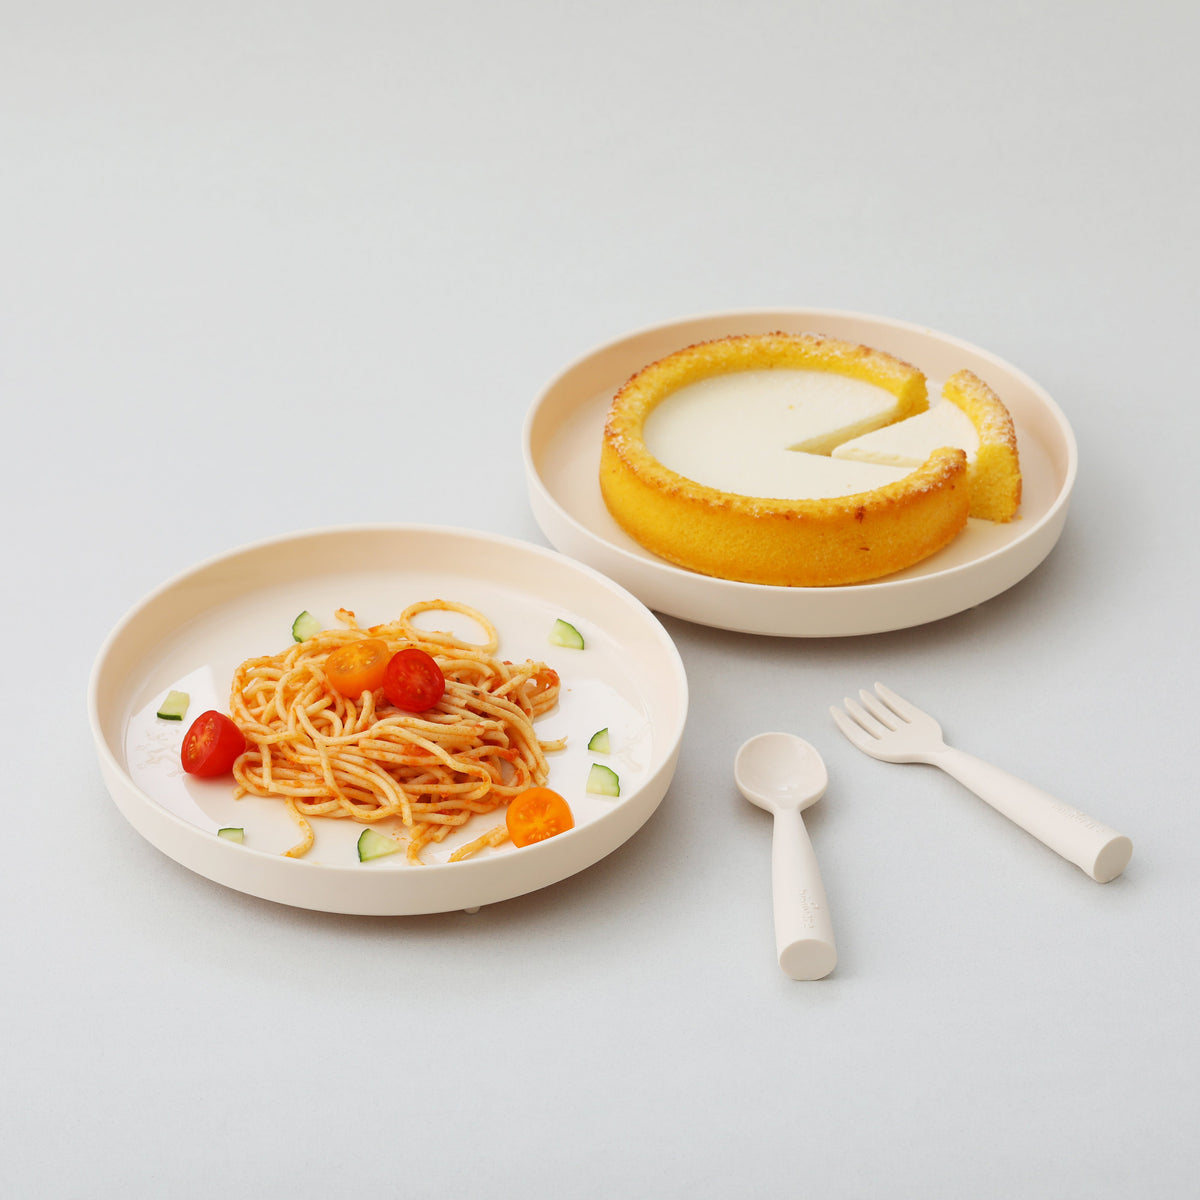 miniware-healthy-meal-set-pla-smart-divider-suction-plate-in-vanilla-+-silicone-divider-in-peach- (27)